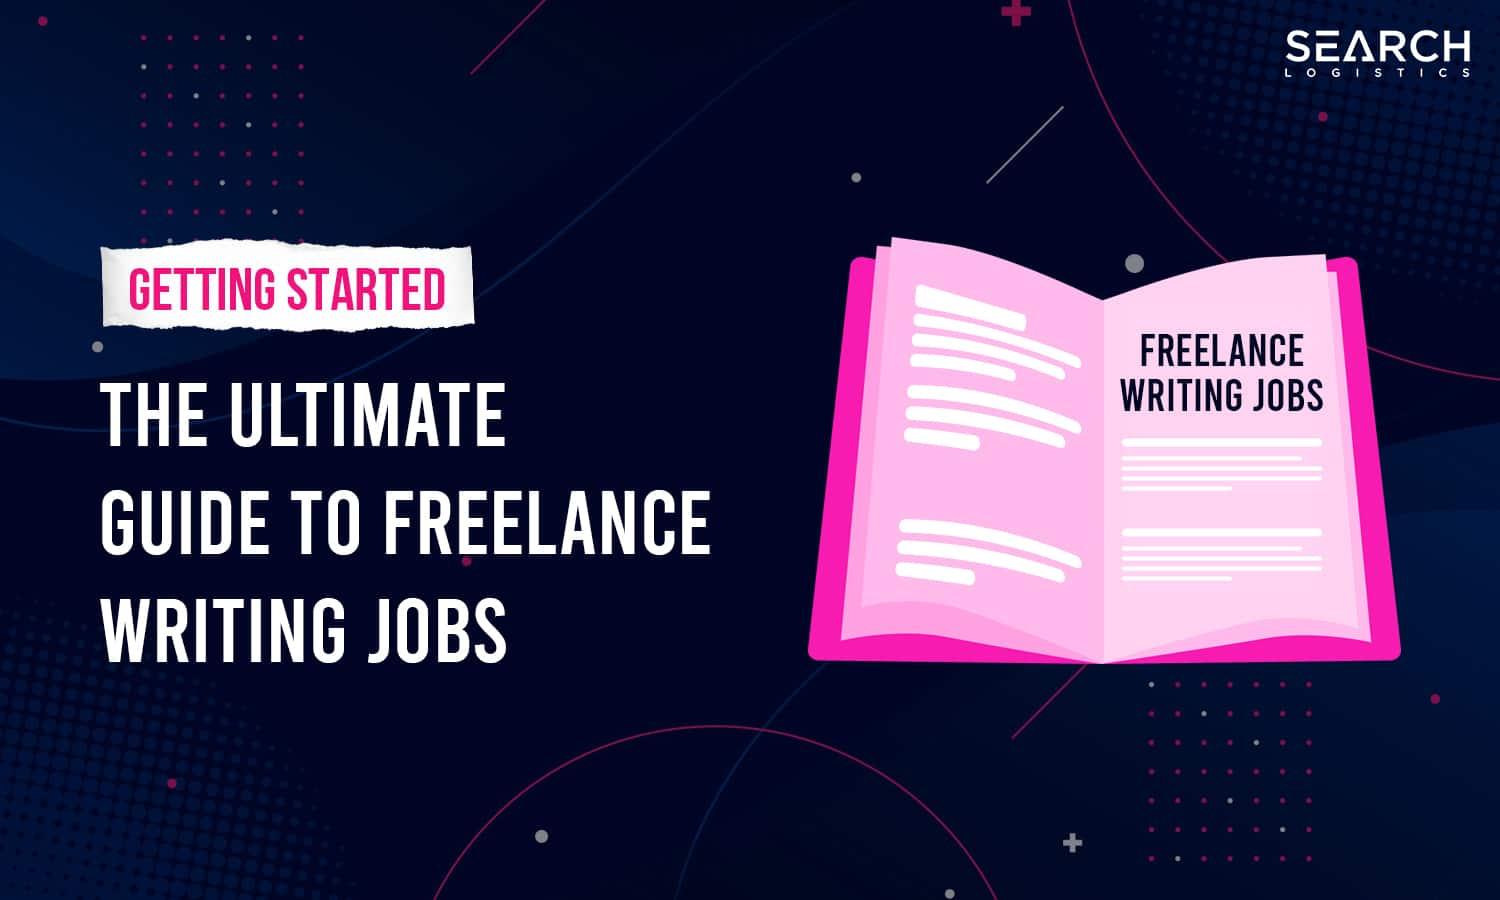 Work From Home Jobs For 18 Year Olds: The Benefits of Freelance Writing for 18 Year Olds